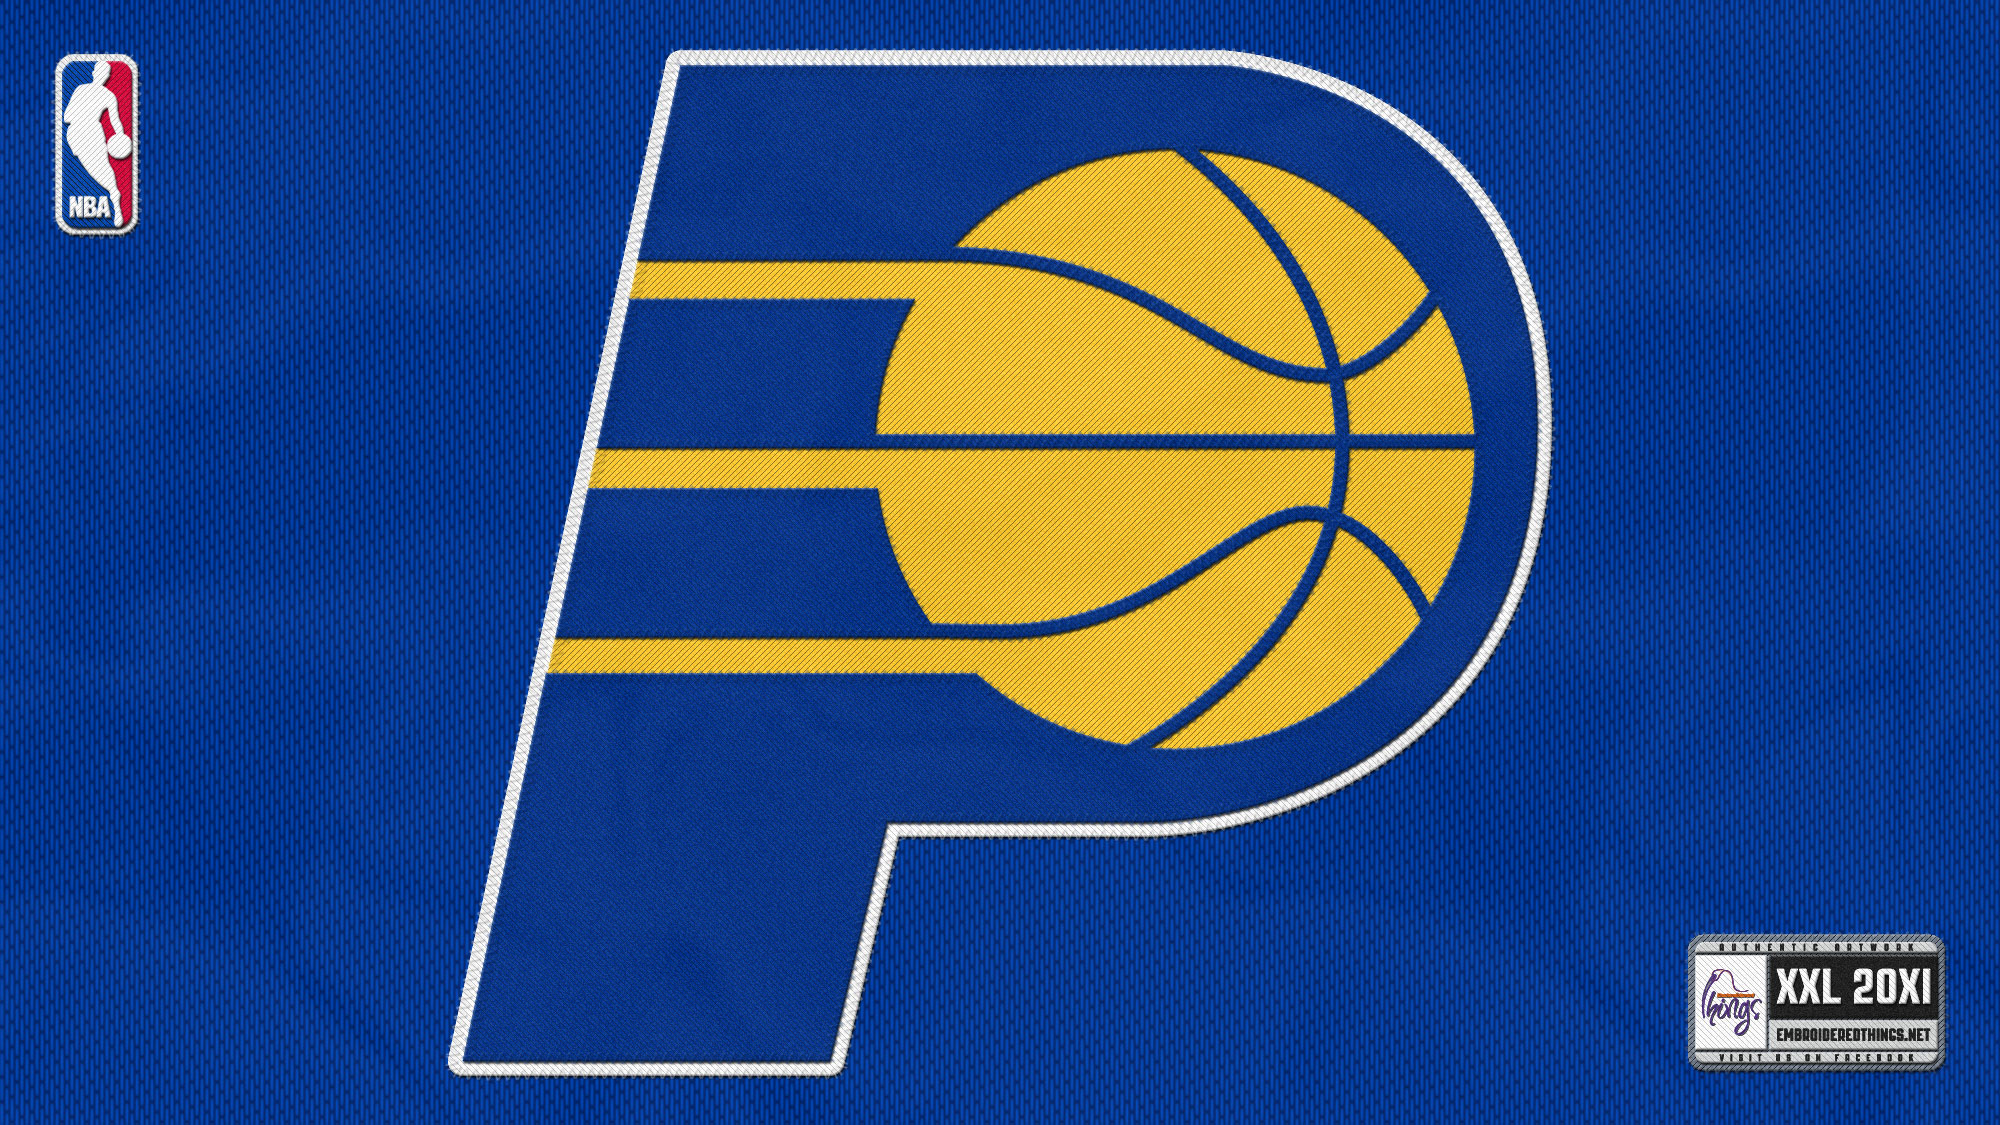 logo wallpaper home search results for indiana pacers logo wallpaper